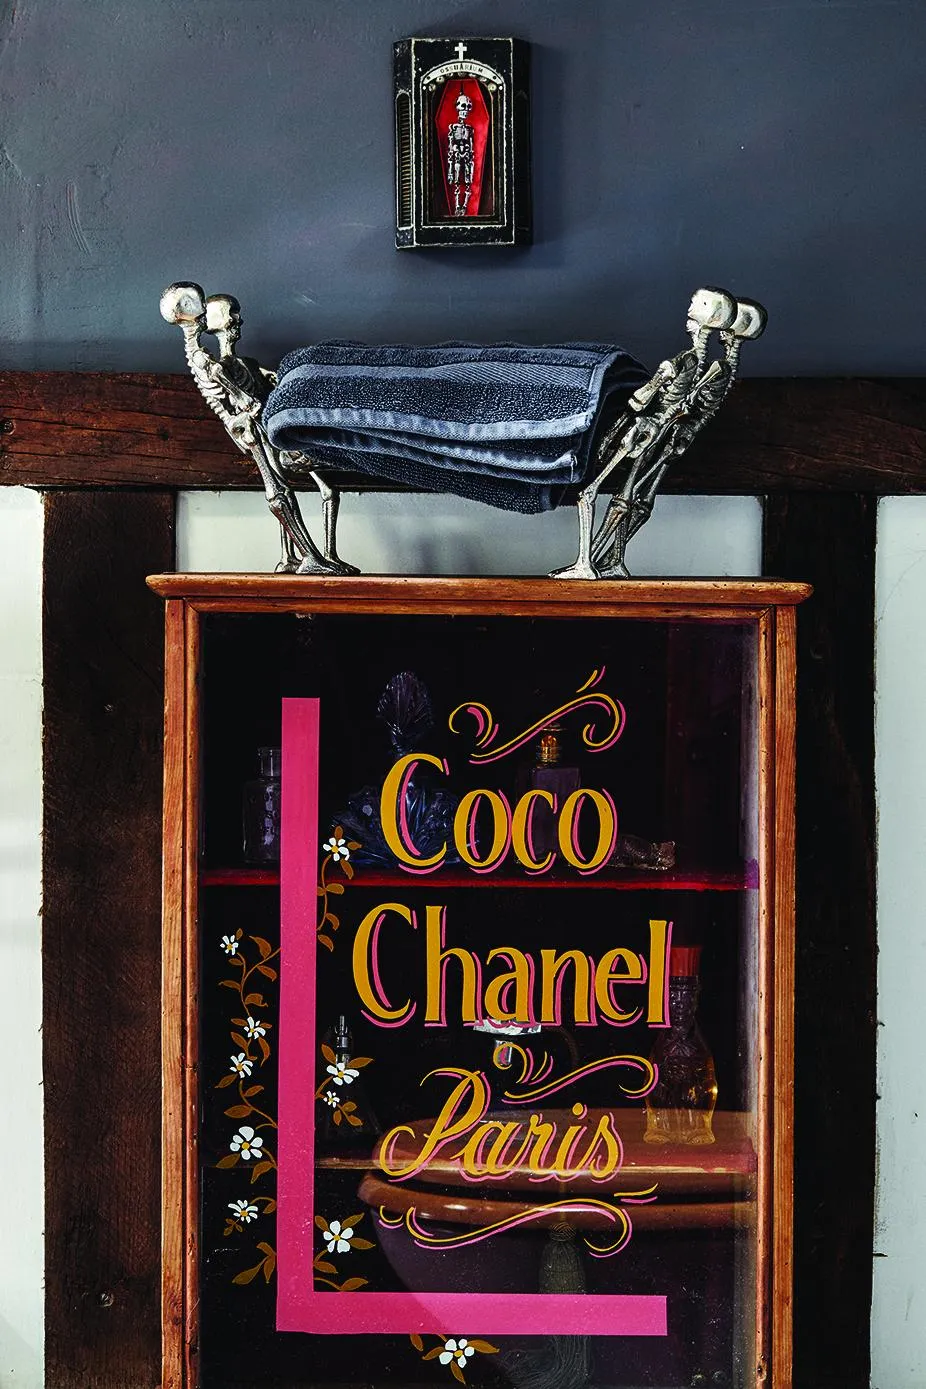 Medieval Welsh hall house, Coco Chanel cabinet.